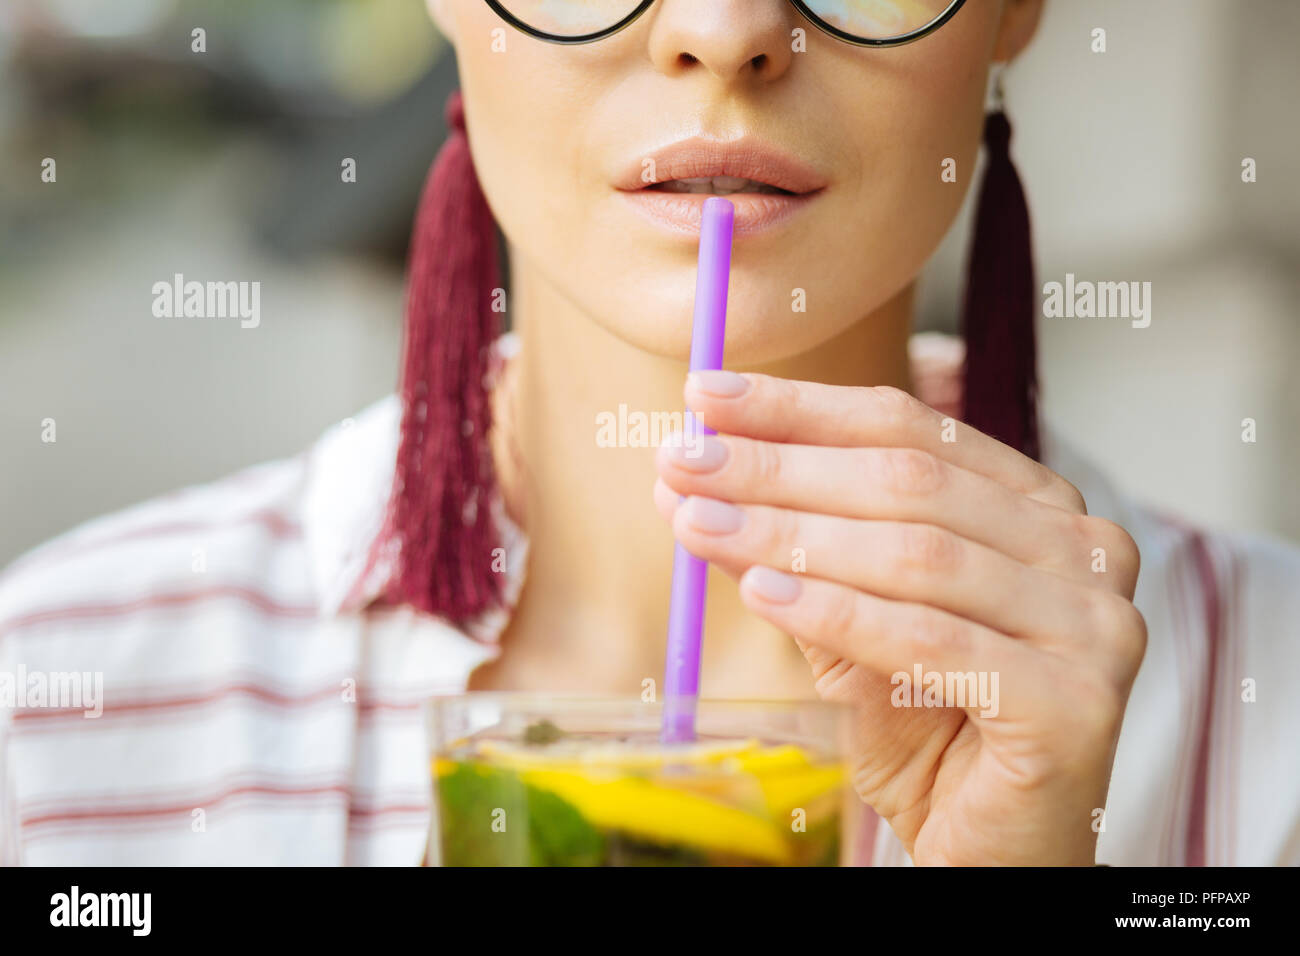 Close up of a sipping straw in a hand of a woman Stock Photo